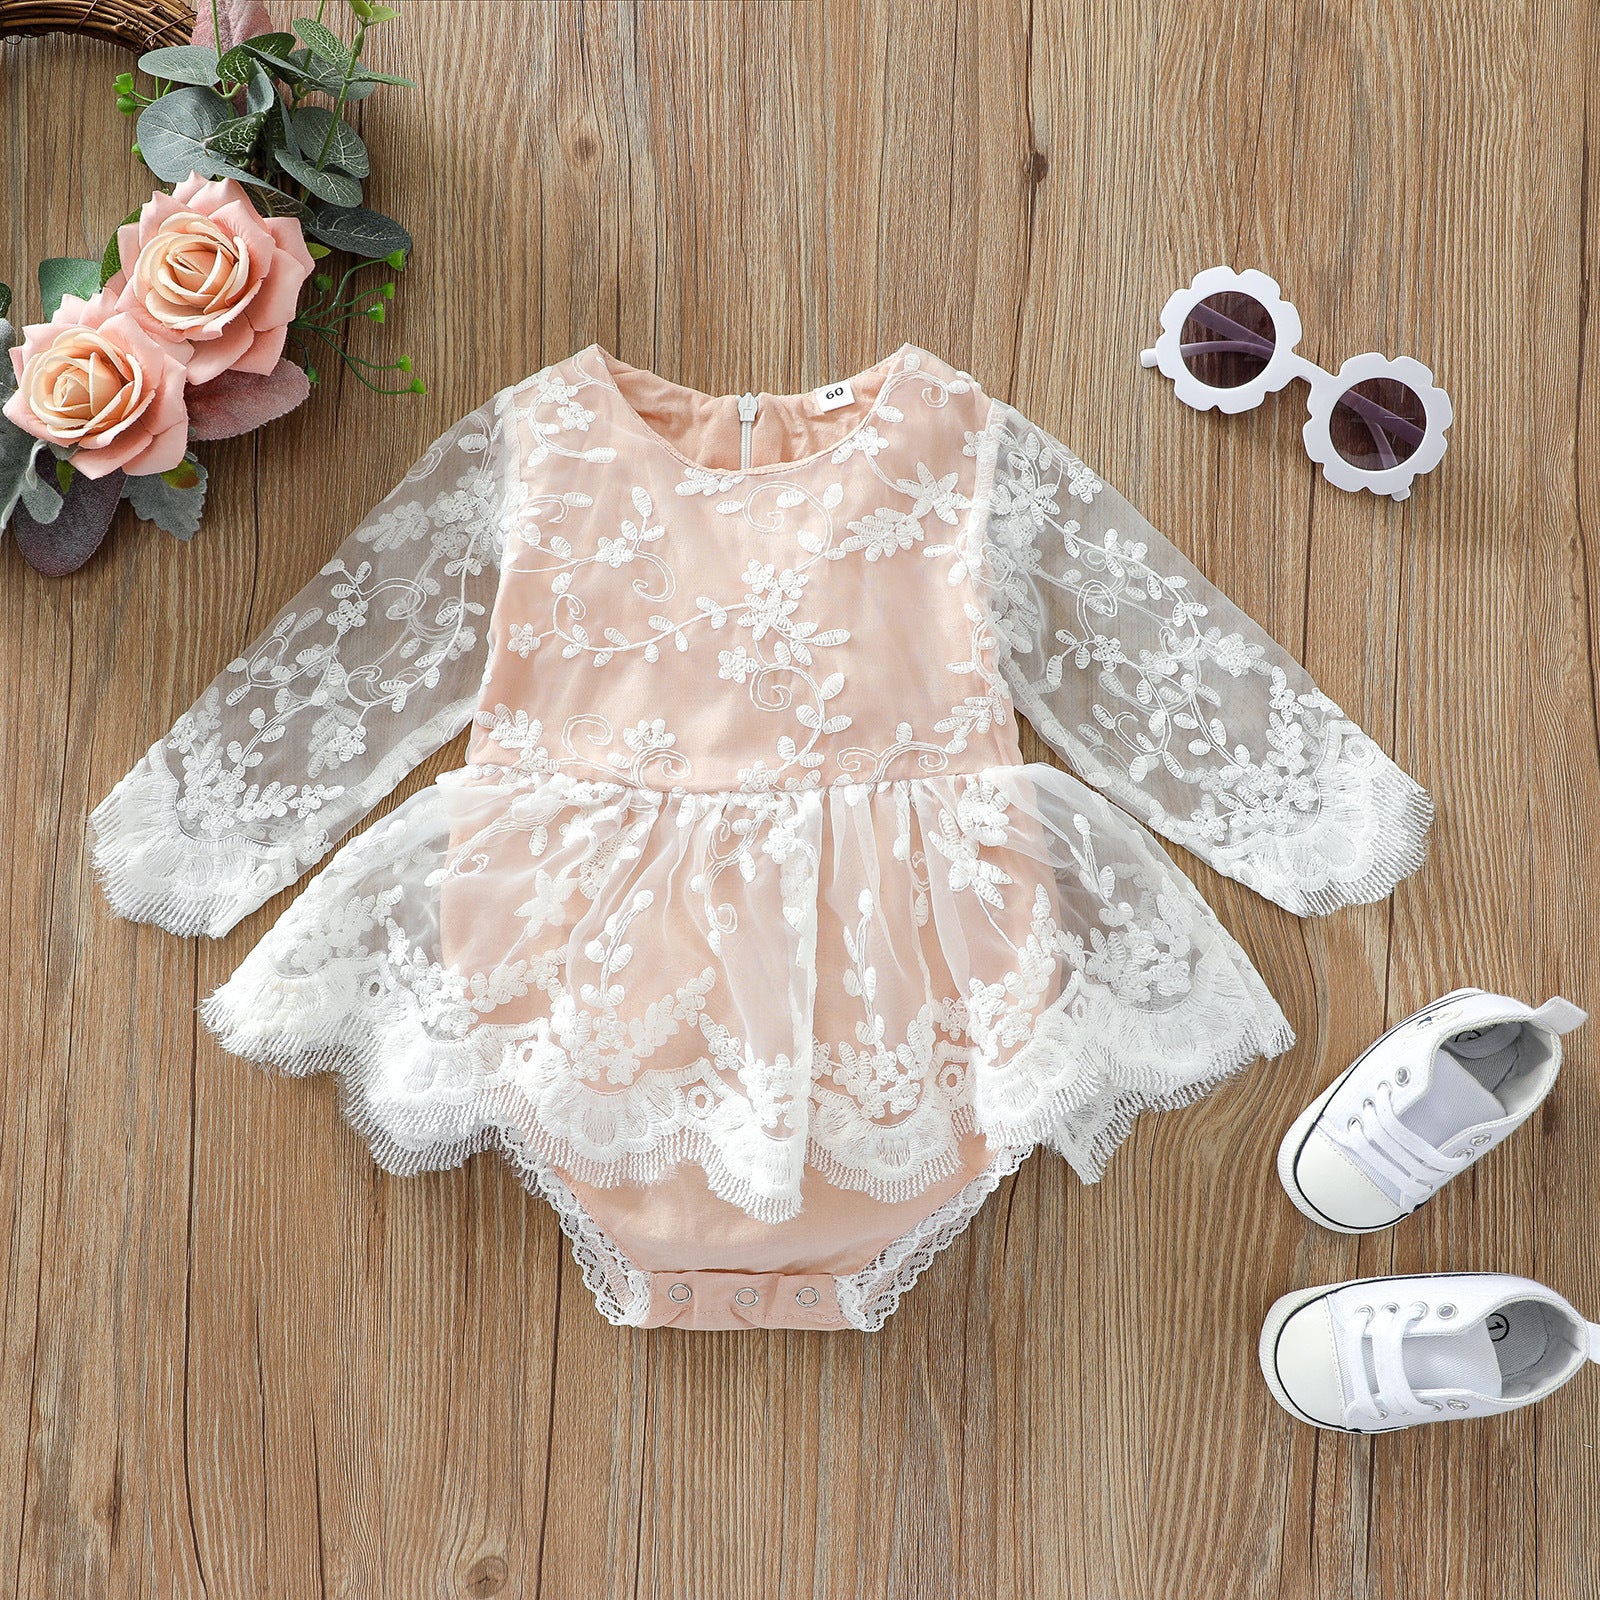 Baby Girl Floral Embroidered Mesh Overlay Design Onesies Dress My Kids-USA